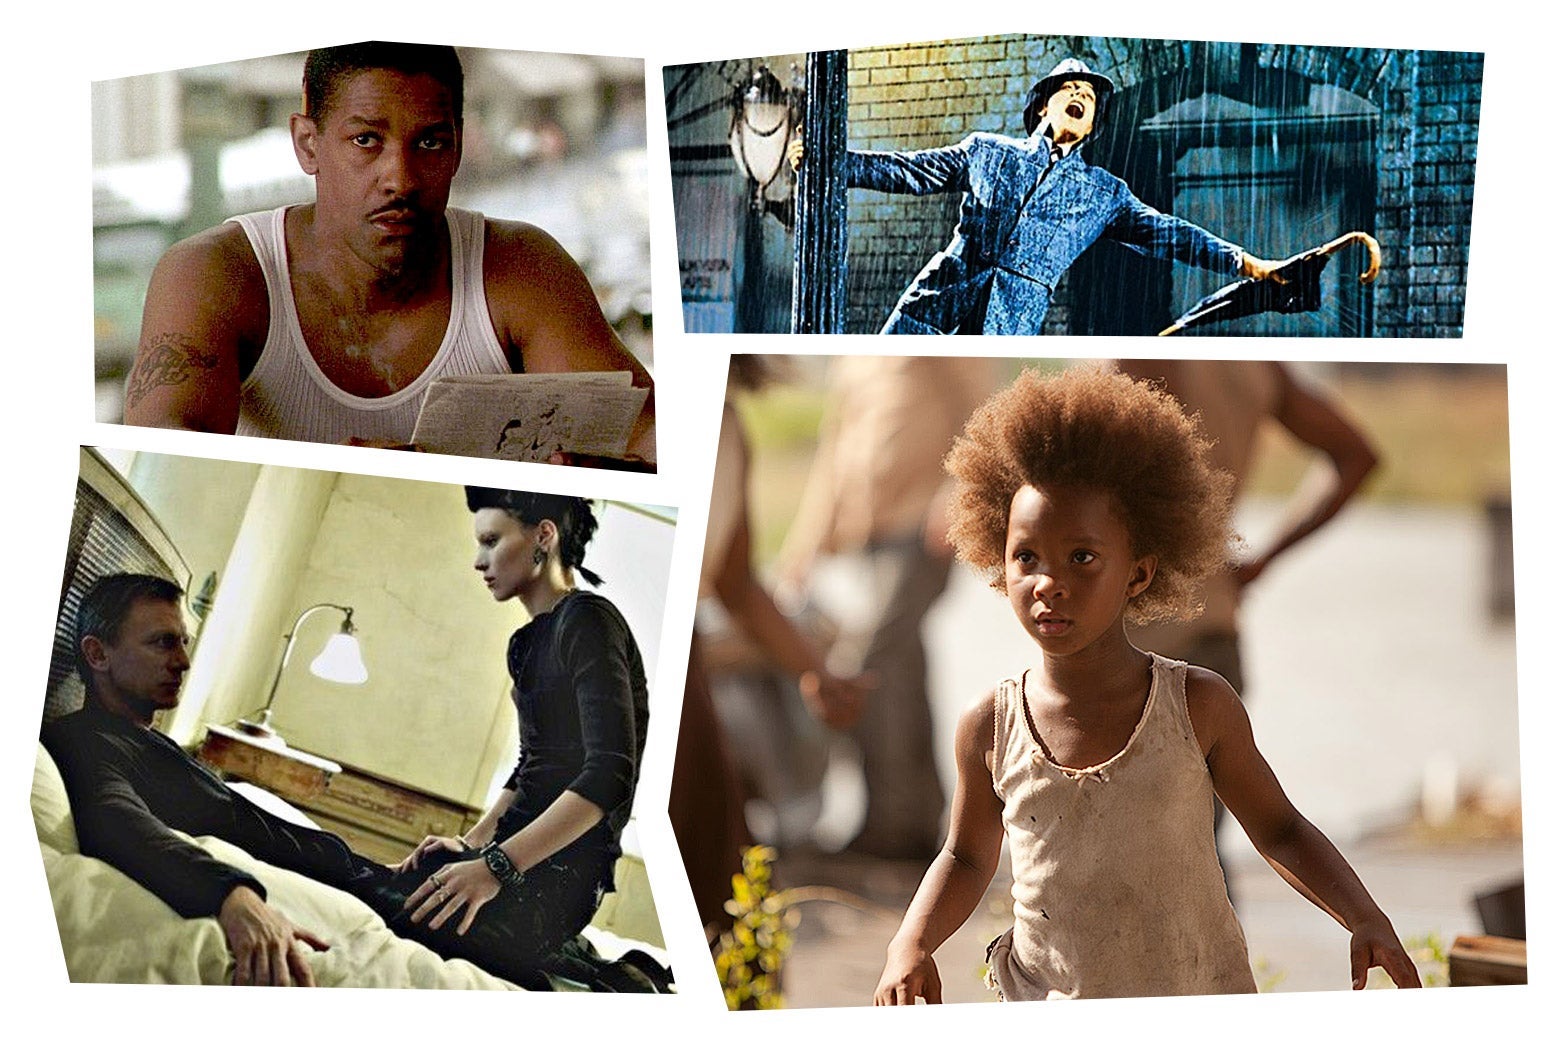 In the top left, a still from Devil in a Blue Dress of Denzel Washington, in the top right, a still from Singin in the Rain of Gene Kelly performing the title song while hanging off of a lamppost in the rain, in the bottom left a still of Rooney Mara straddling Daniel Craig in a bed from The Girl With the Dragon Tattoo, and in the bottom right a still of a young Quvenzhané Wallis in Beasts of the Southern Wild.